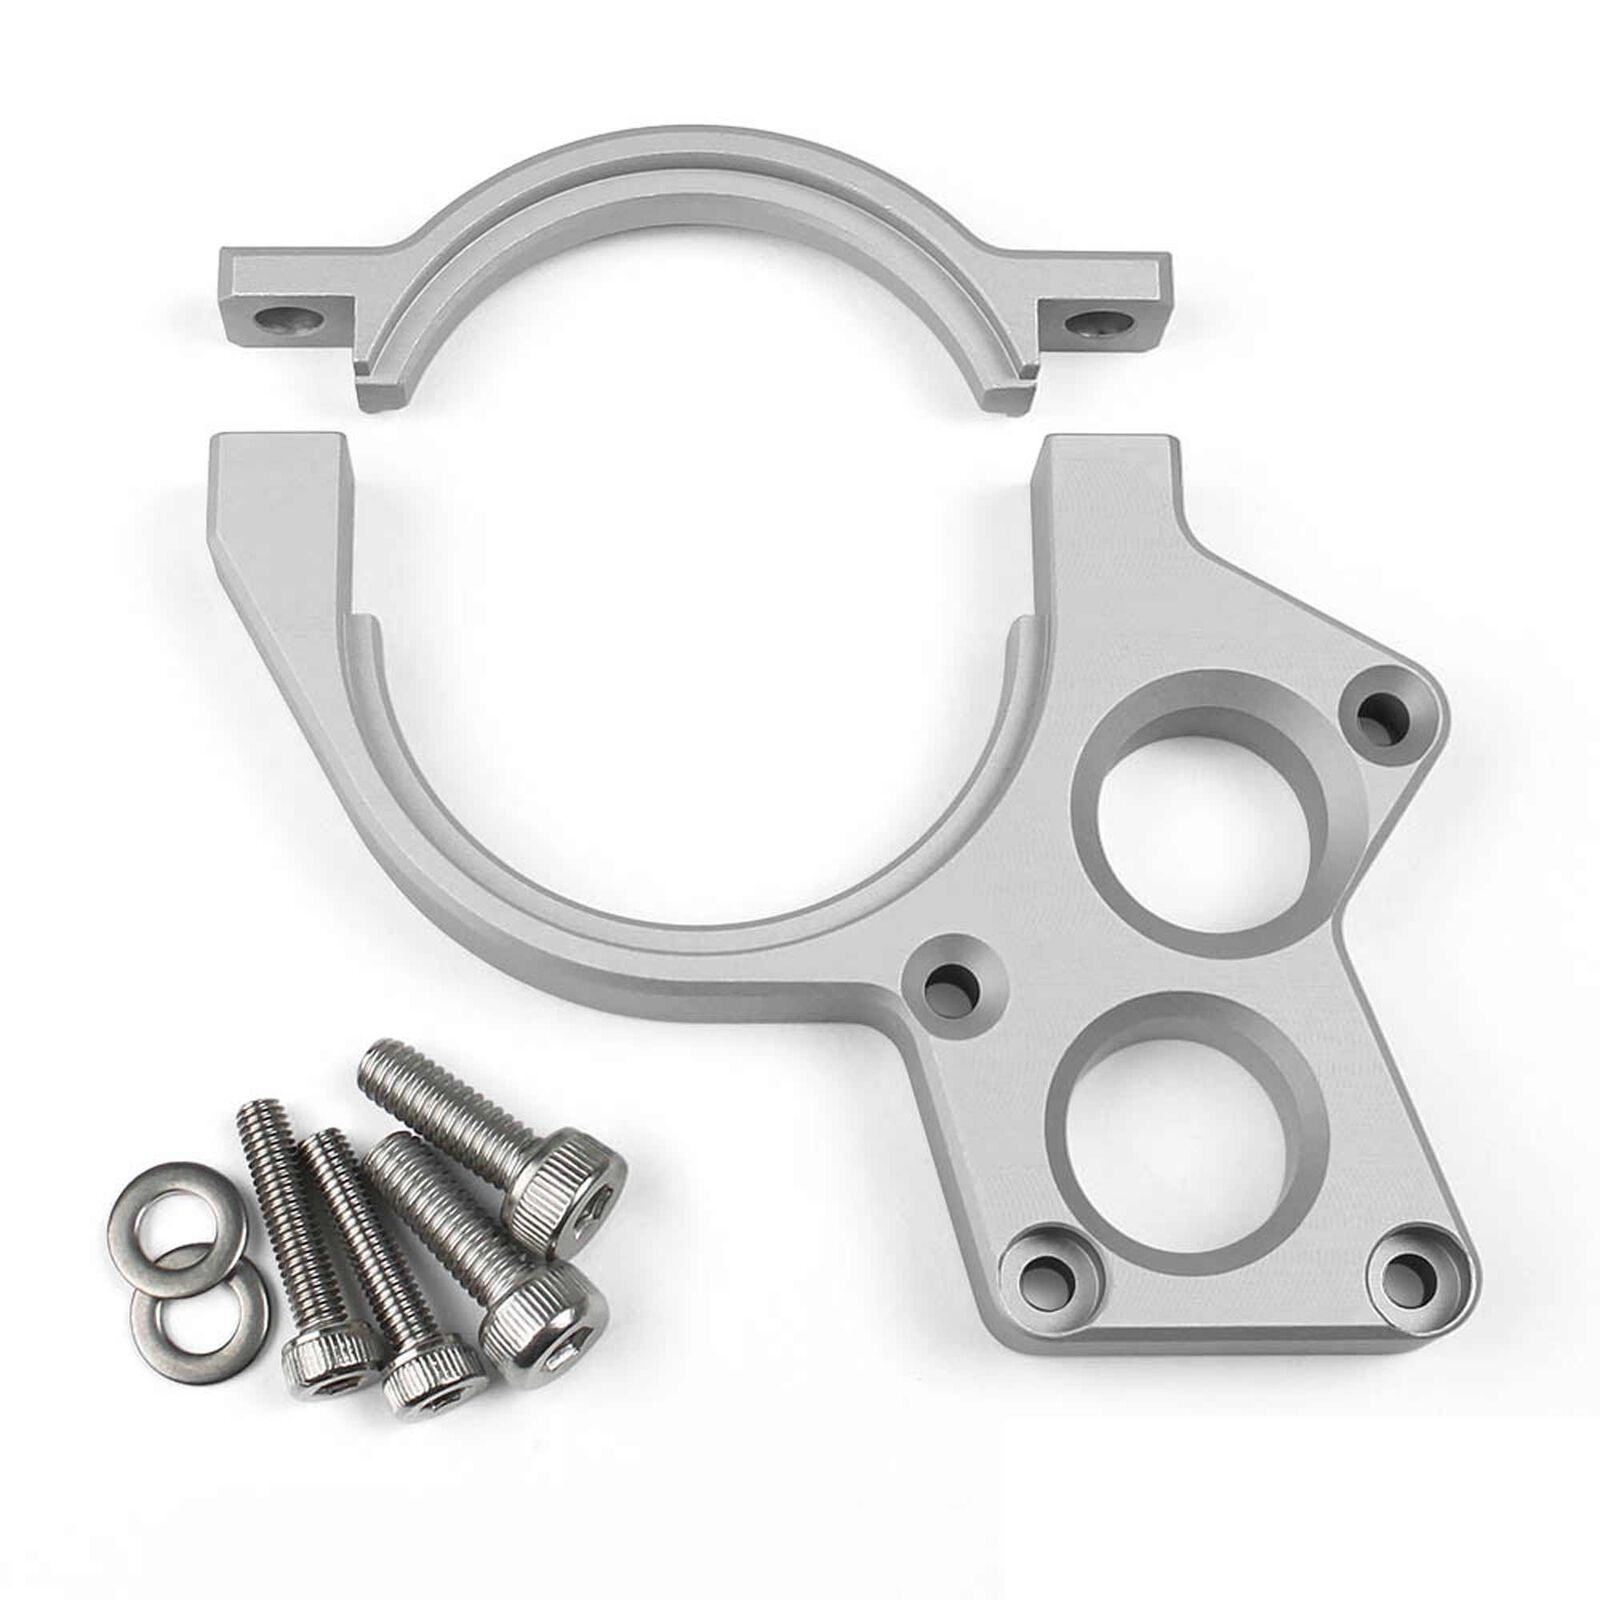 Incision Yeti/RR10 Motor Plate Clear Anodized